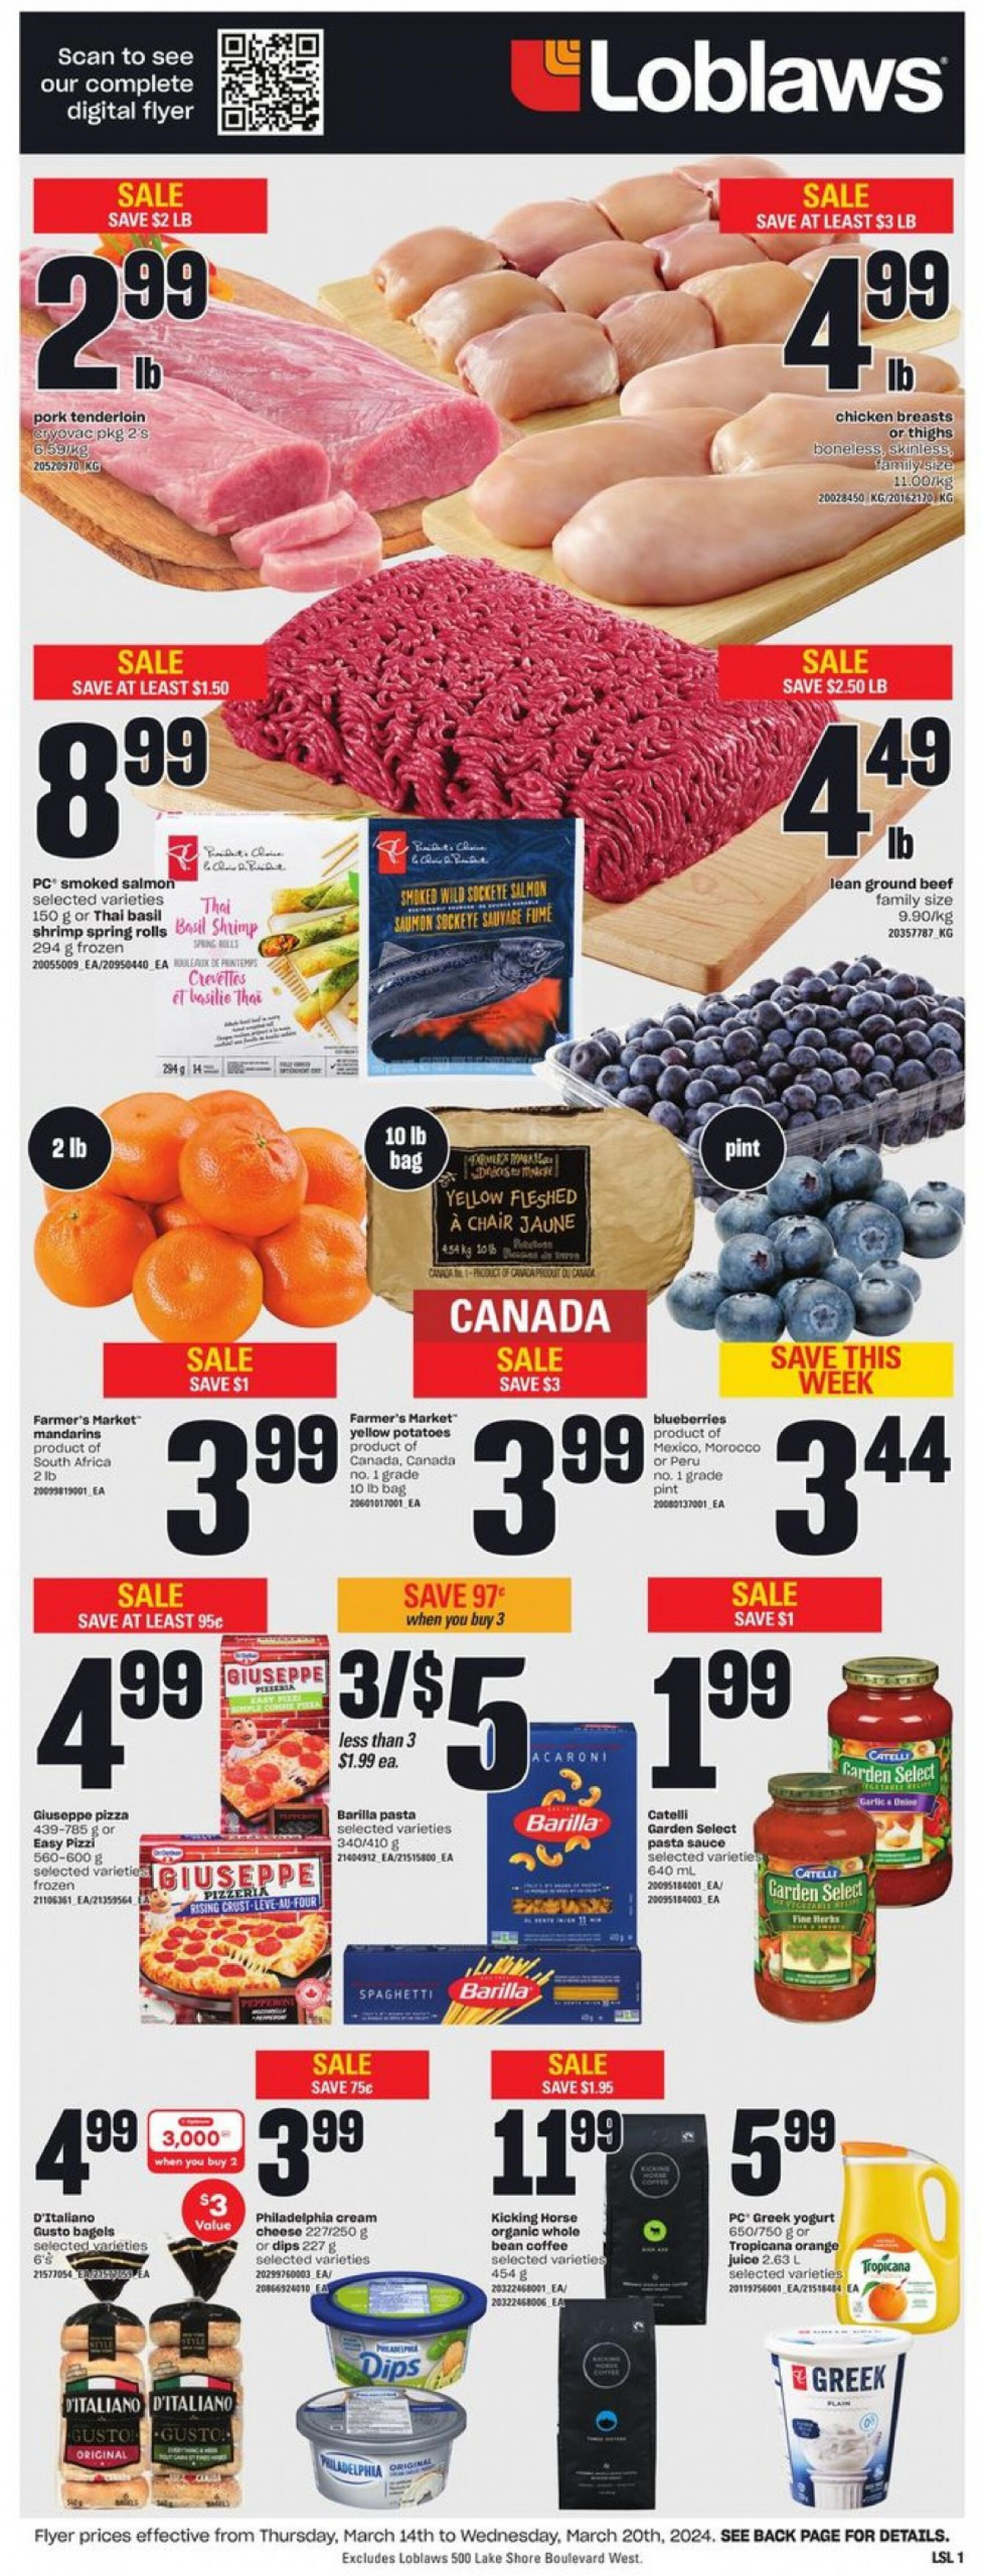 loblaws - Loblaws valid from 14.03.2024 - page: 5